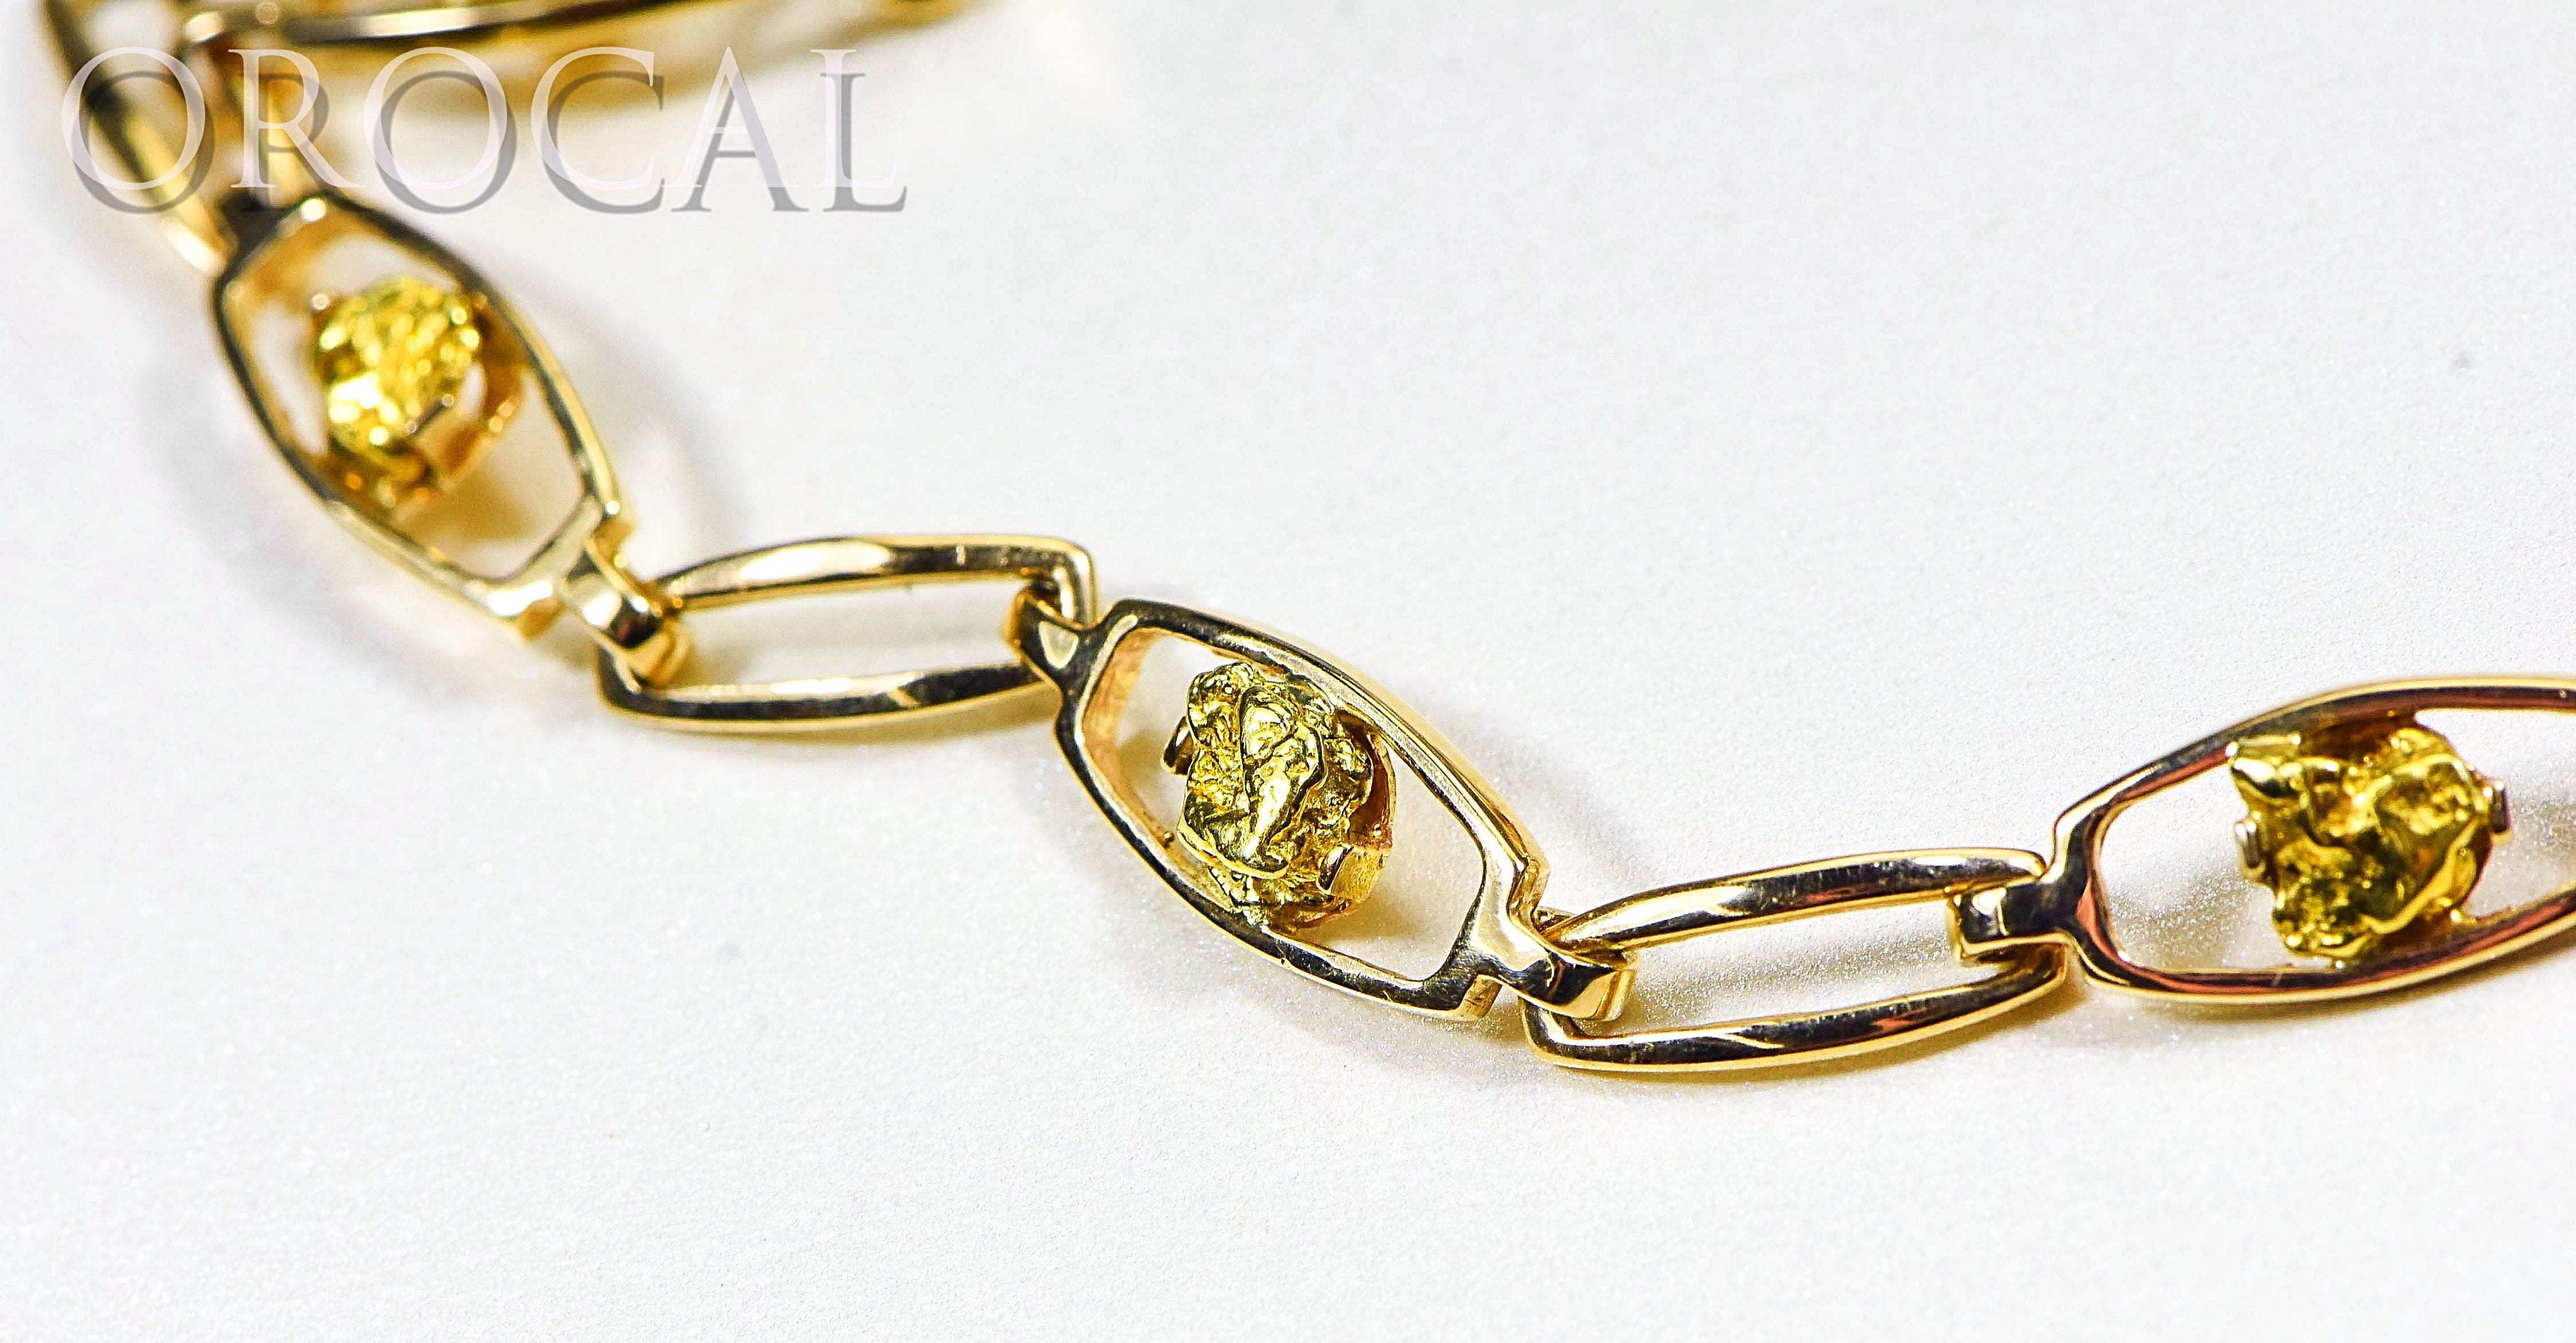 Gold Nugget Bracelet "Orocal" BDLOV5LHNC89 Genuine Hand Crafted Jewelry - 14K Gold Casting